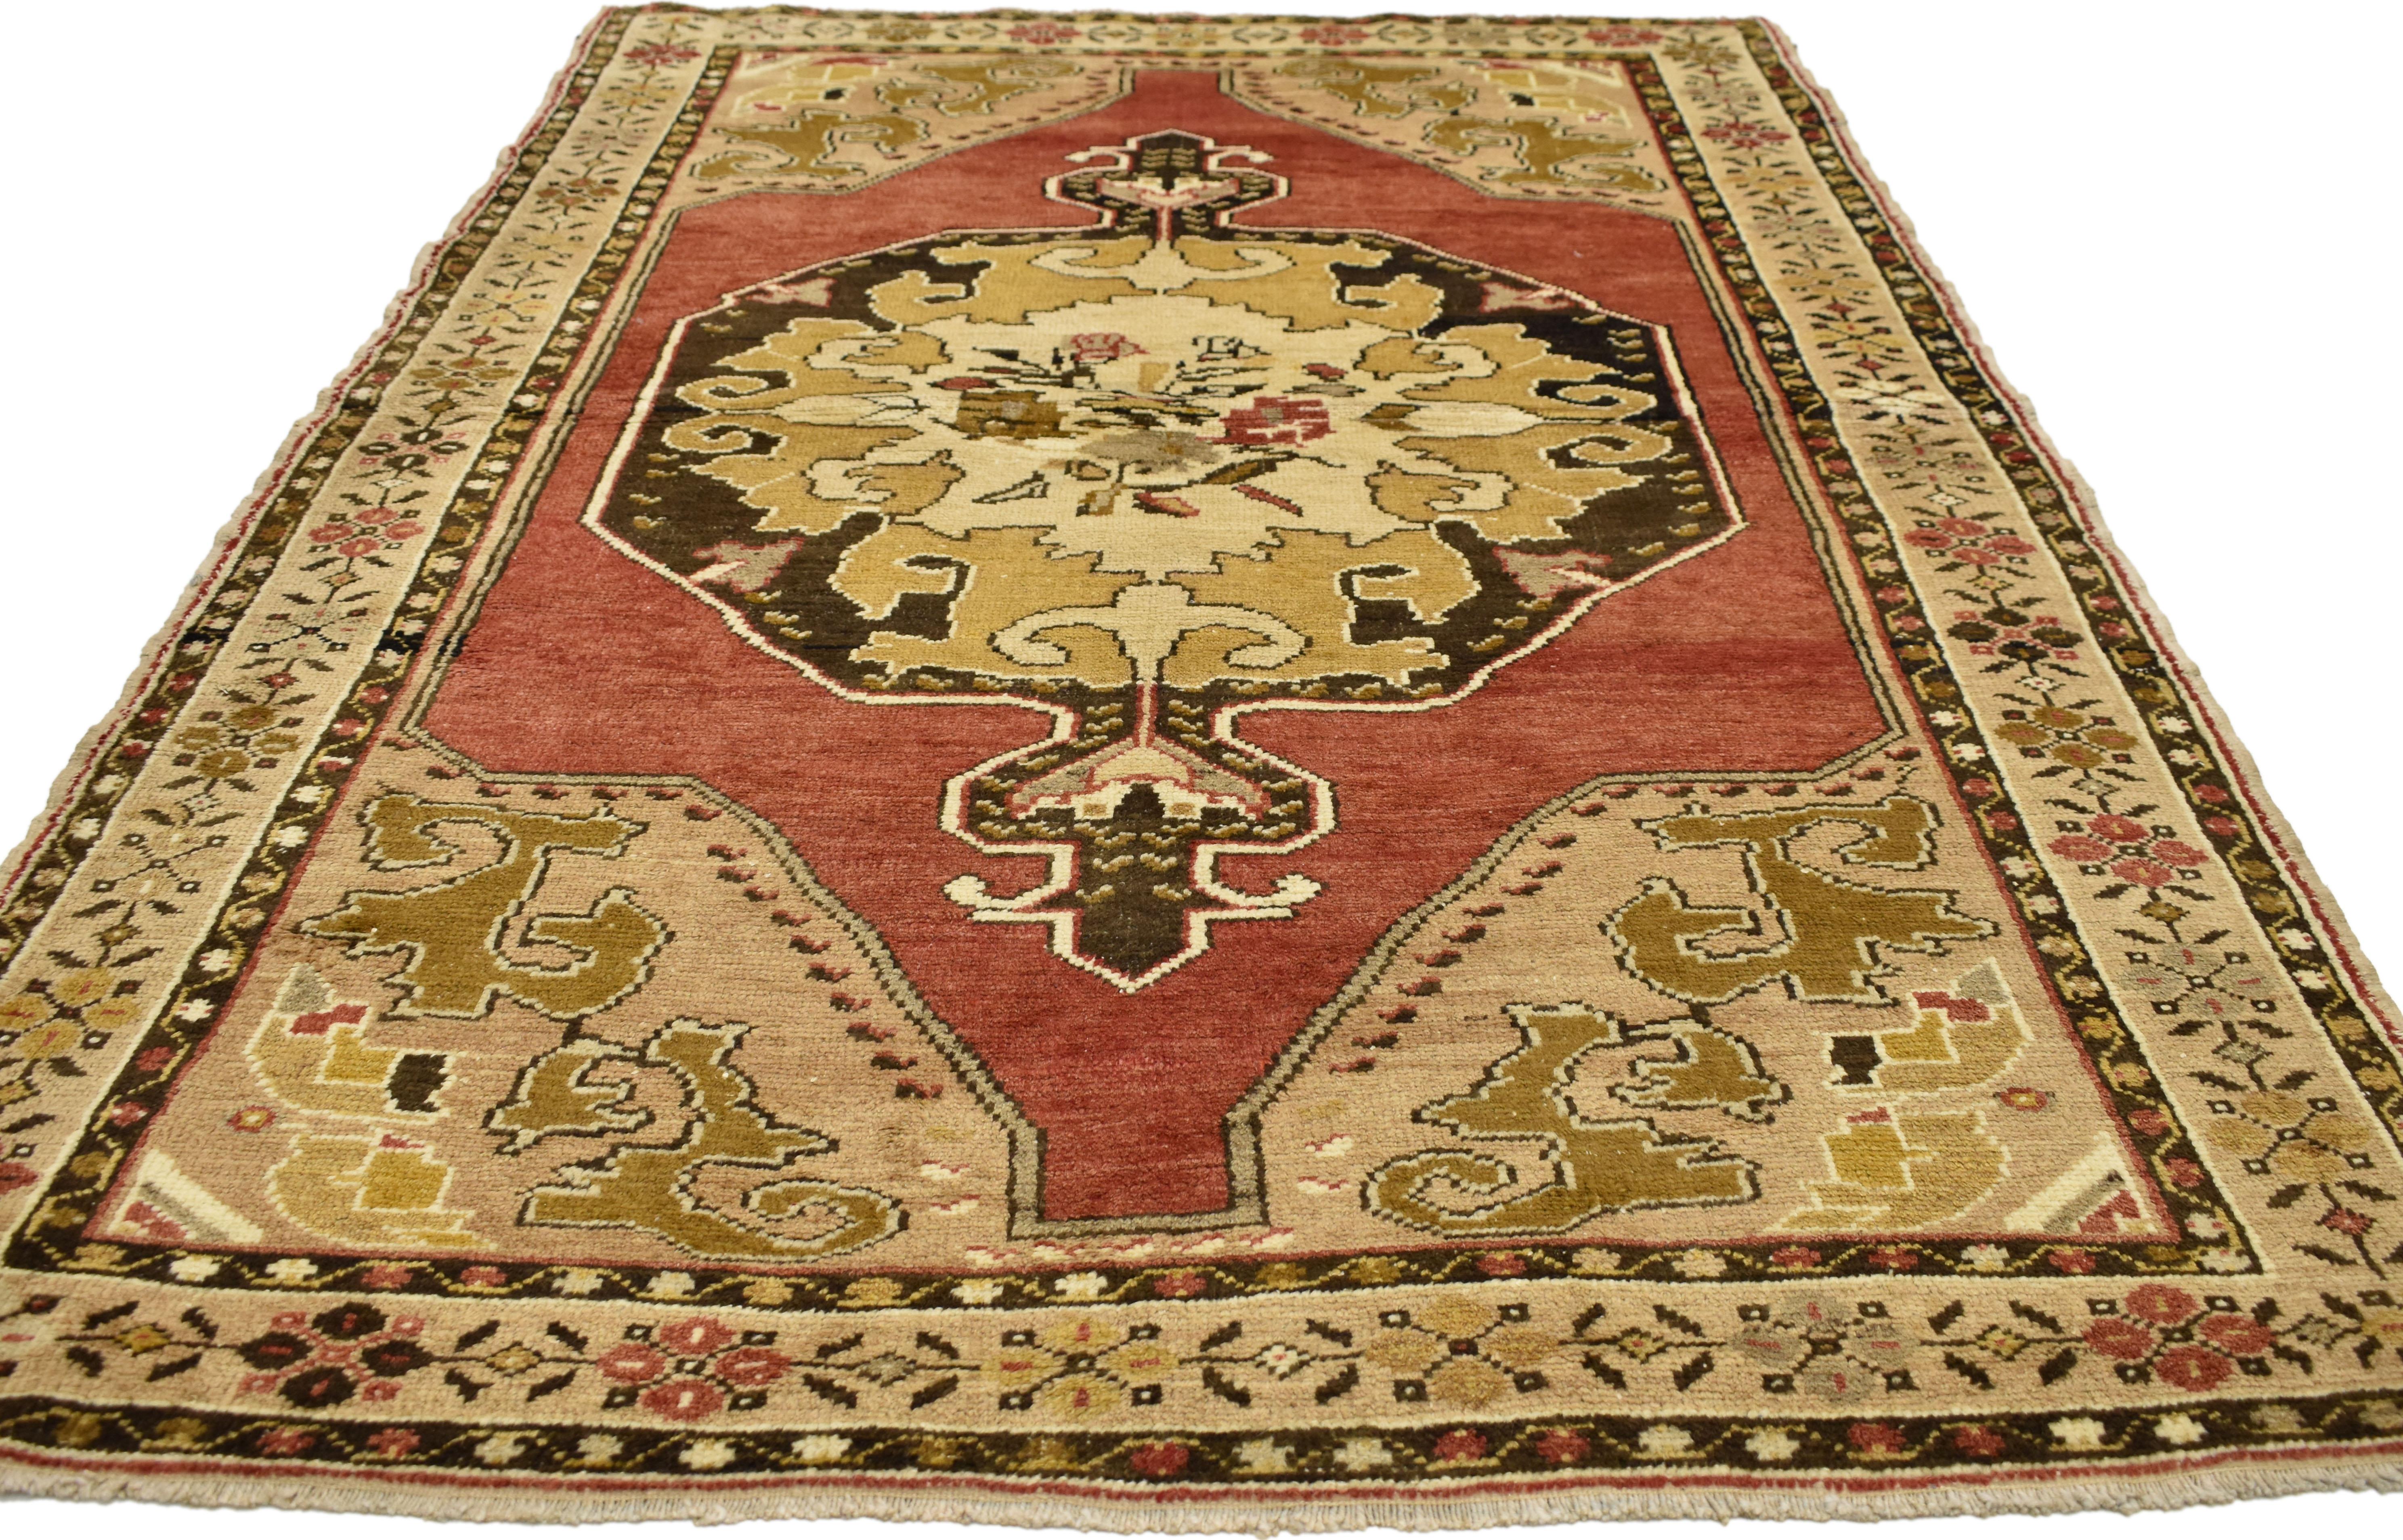 Vintage Turkish Oushak Rug with Traditional Style In Good Condition For Sale In Dallas, TX